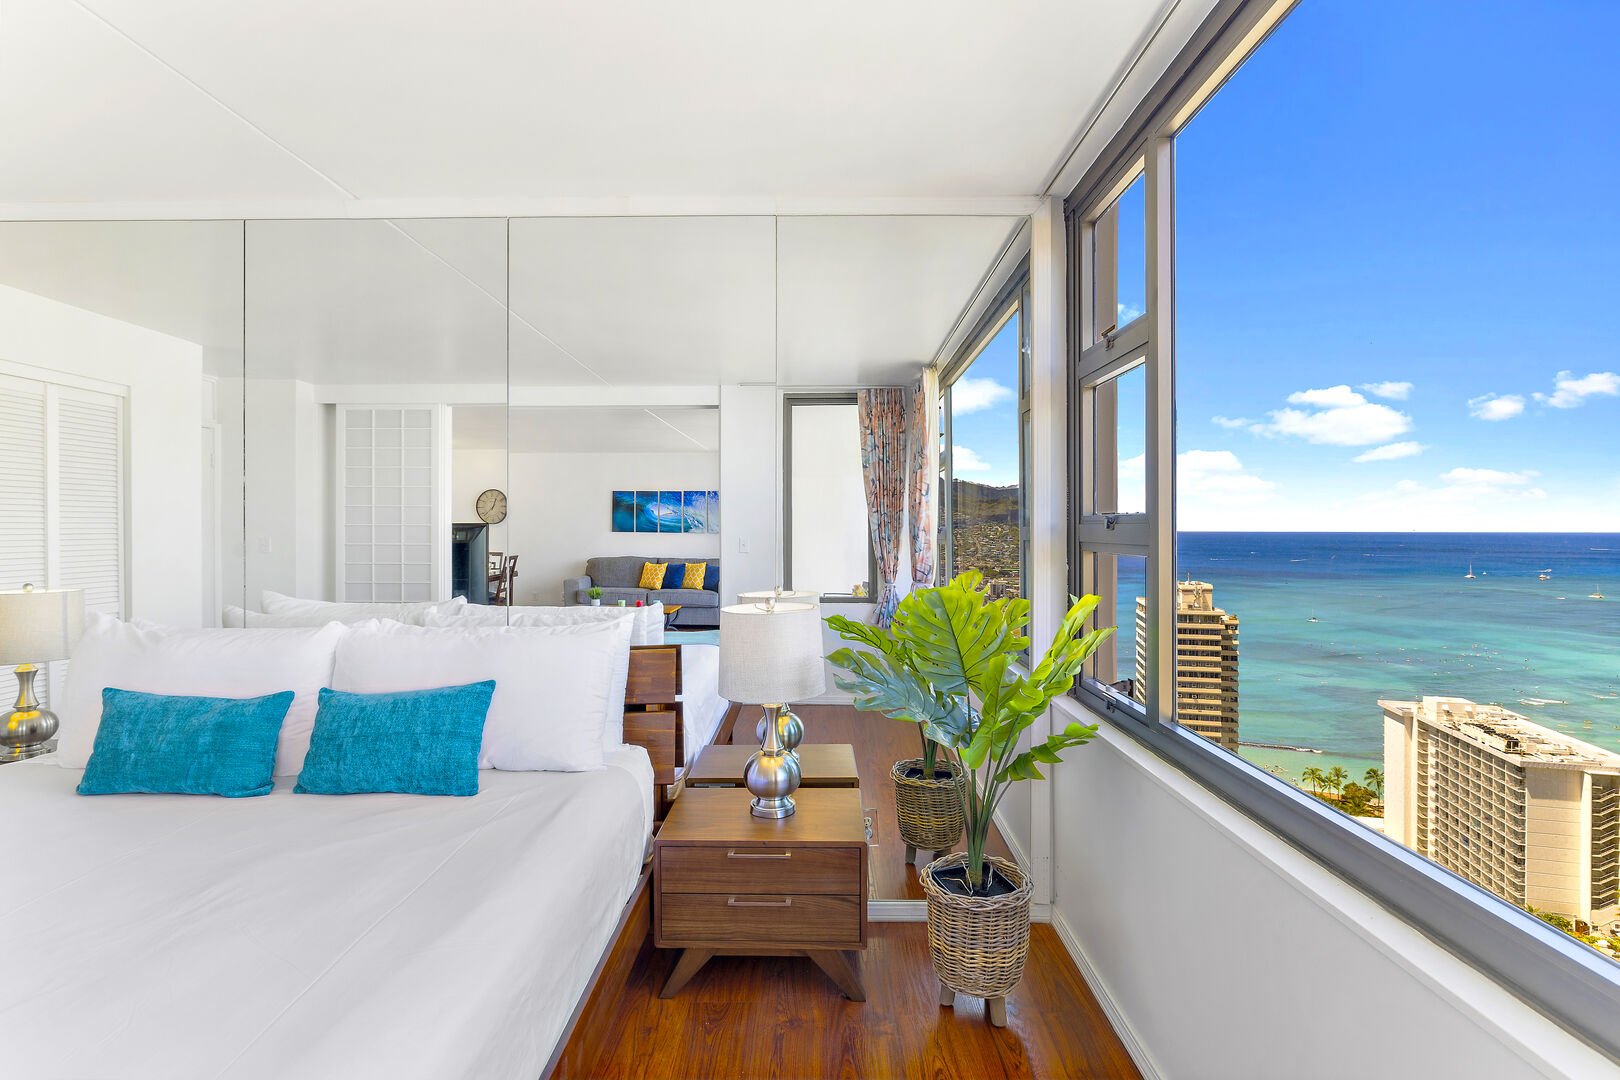 Enjoy in your bedroom with a King-size bed and a beautiful ocean view.